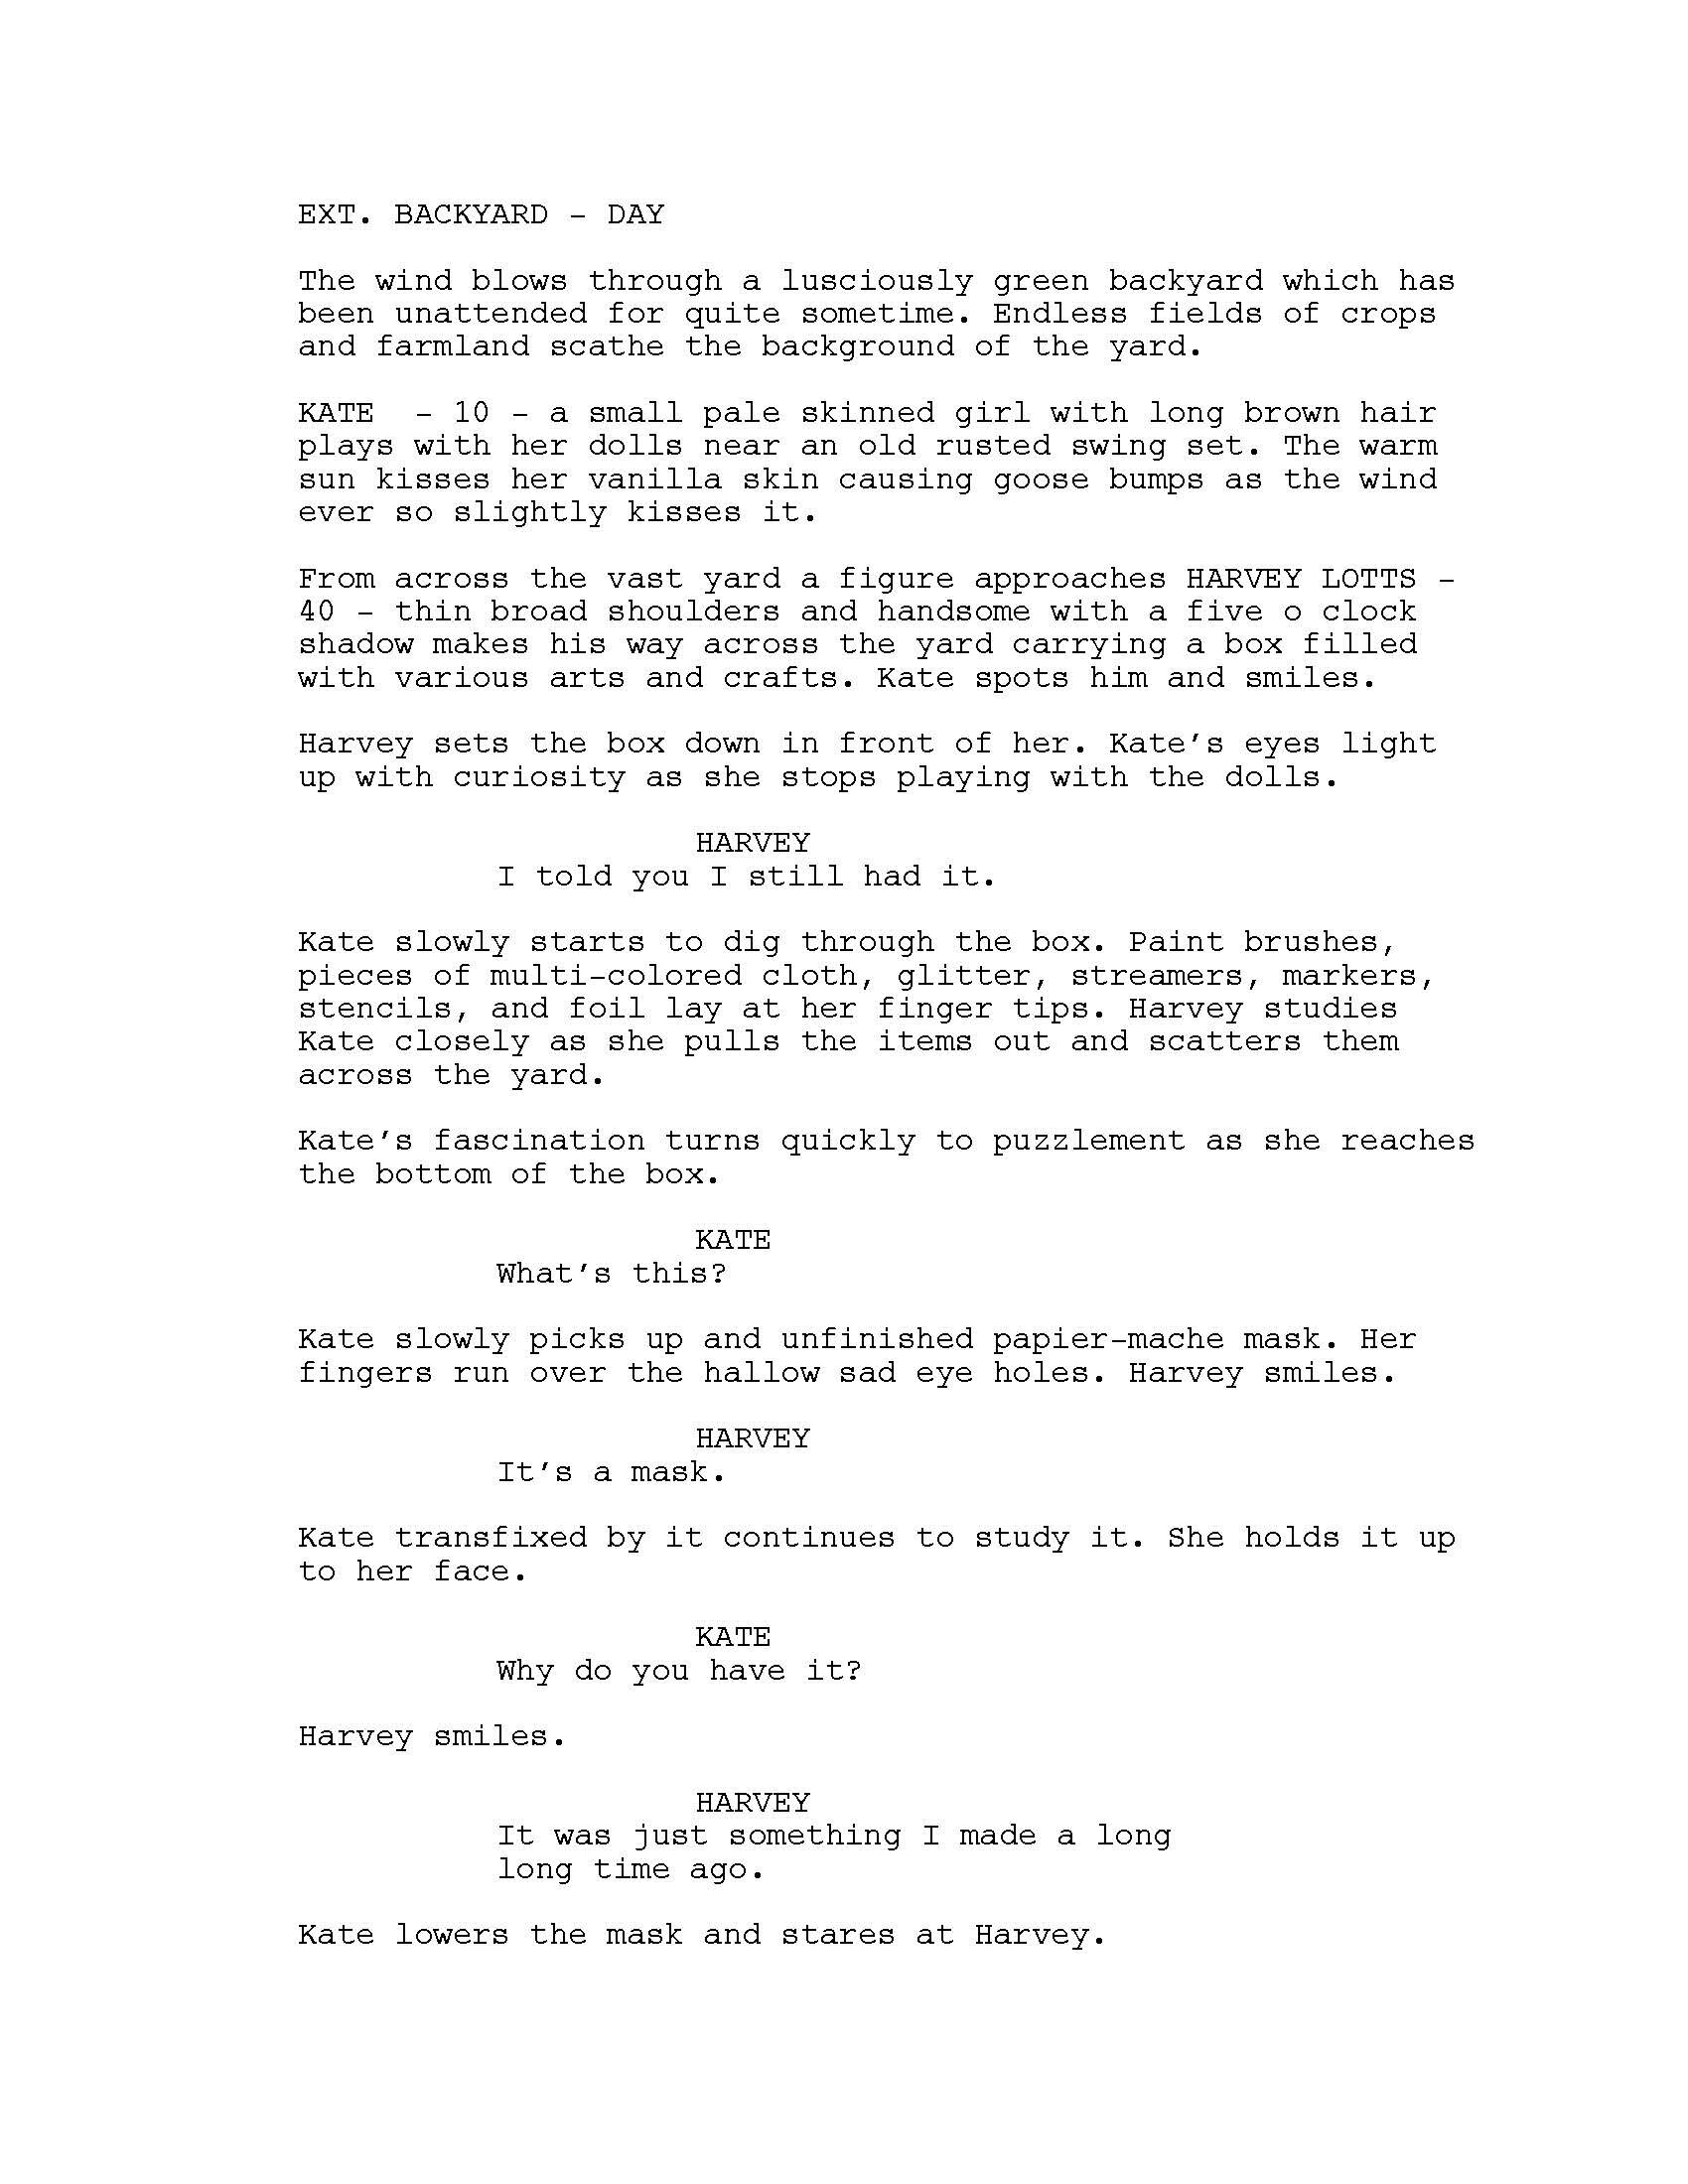 Uncommitted Script v5 (1)_Page_002.jpg